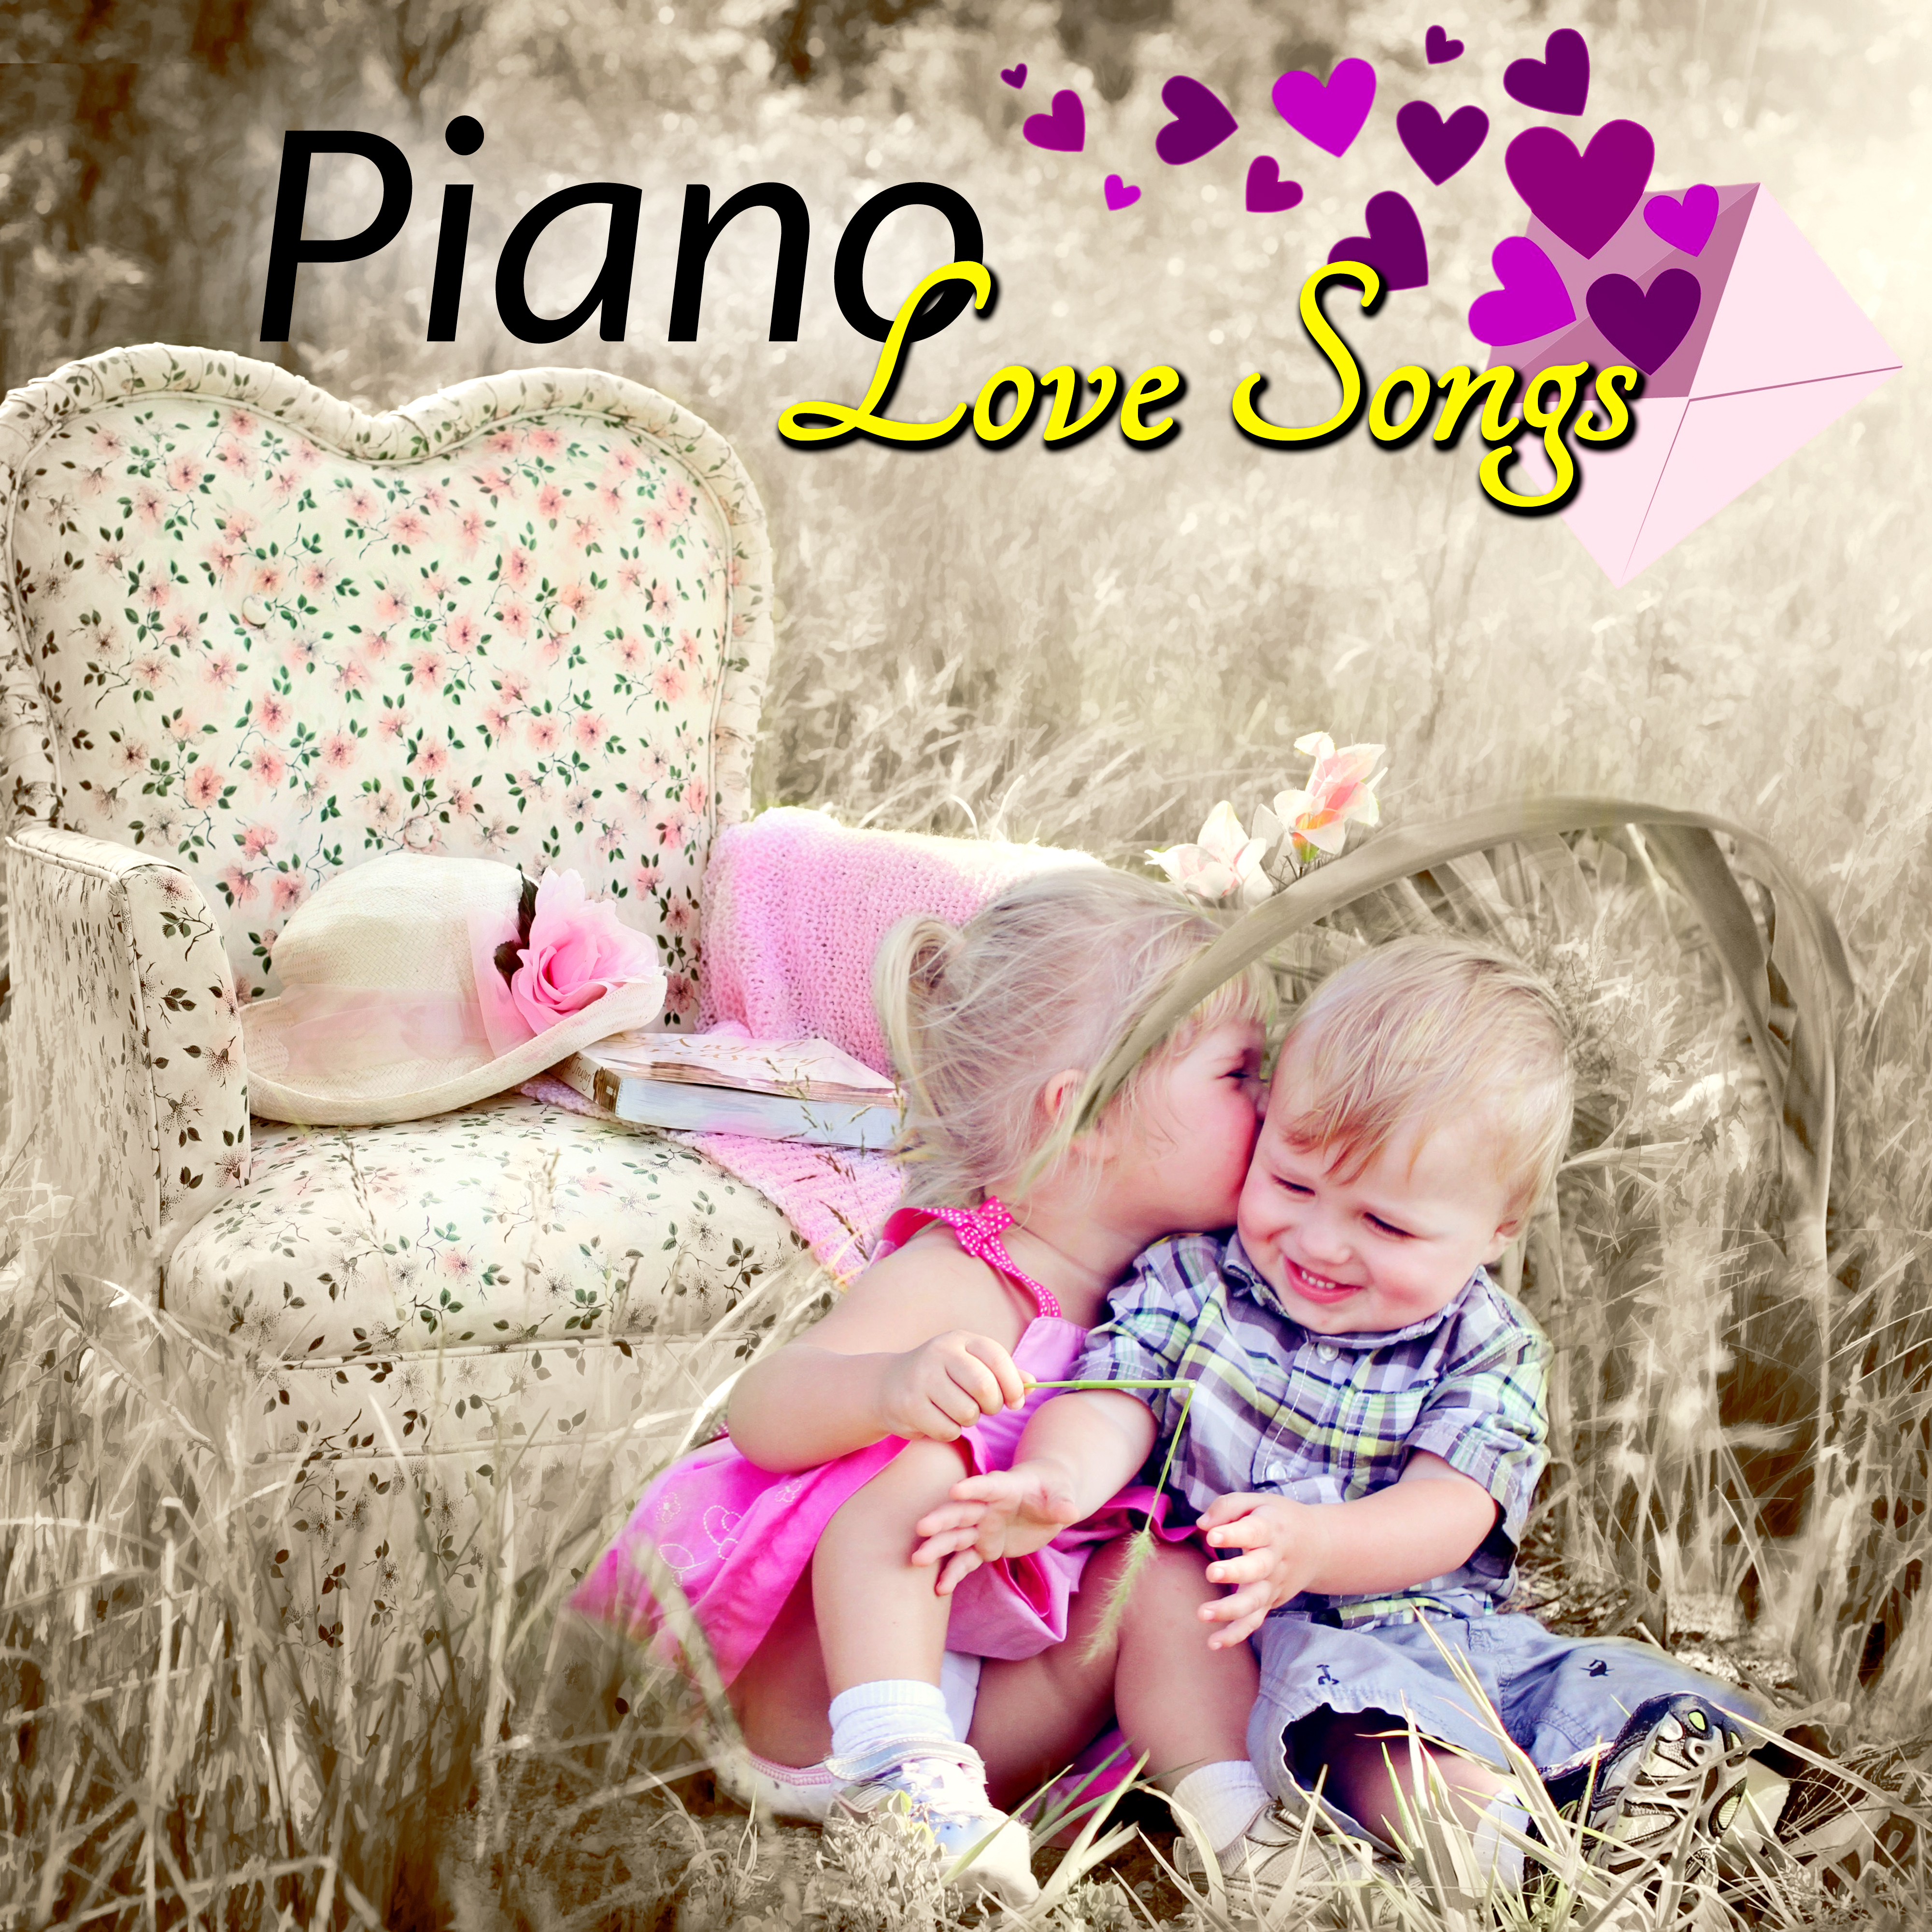 Piano Love Songs – The Best Romantic Piano Music for Lovers, Easy Listening, Candlelight Dinner Party, Instrumental Music for Quiet Moments